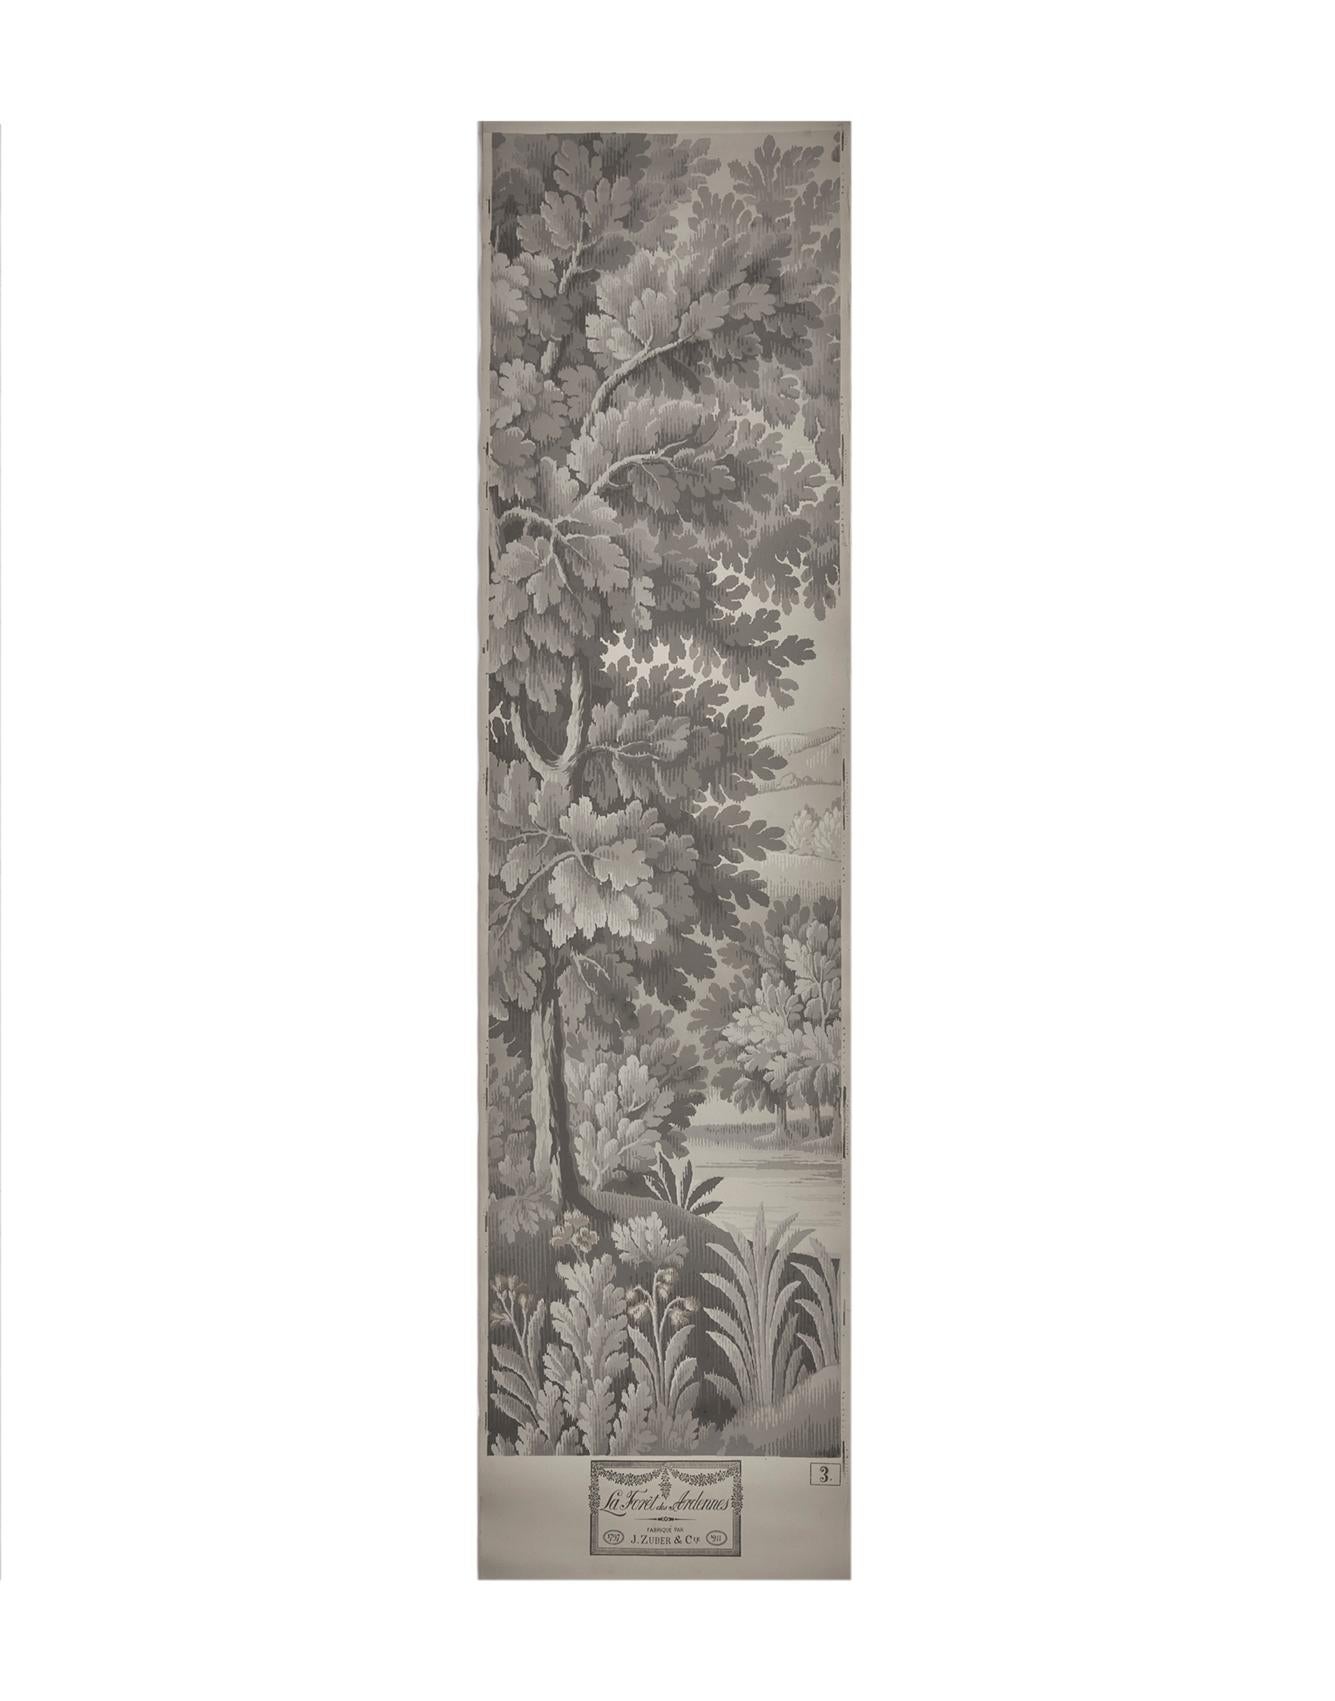 Zuber, 'La Foret des Ardennes' Hand Wood Blocked Scenic Wall Paper In Good Condition For Sale In Rixheim, FR